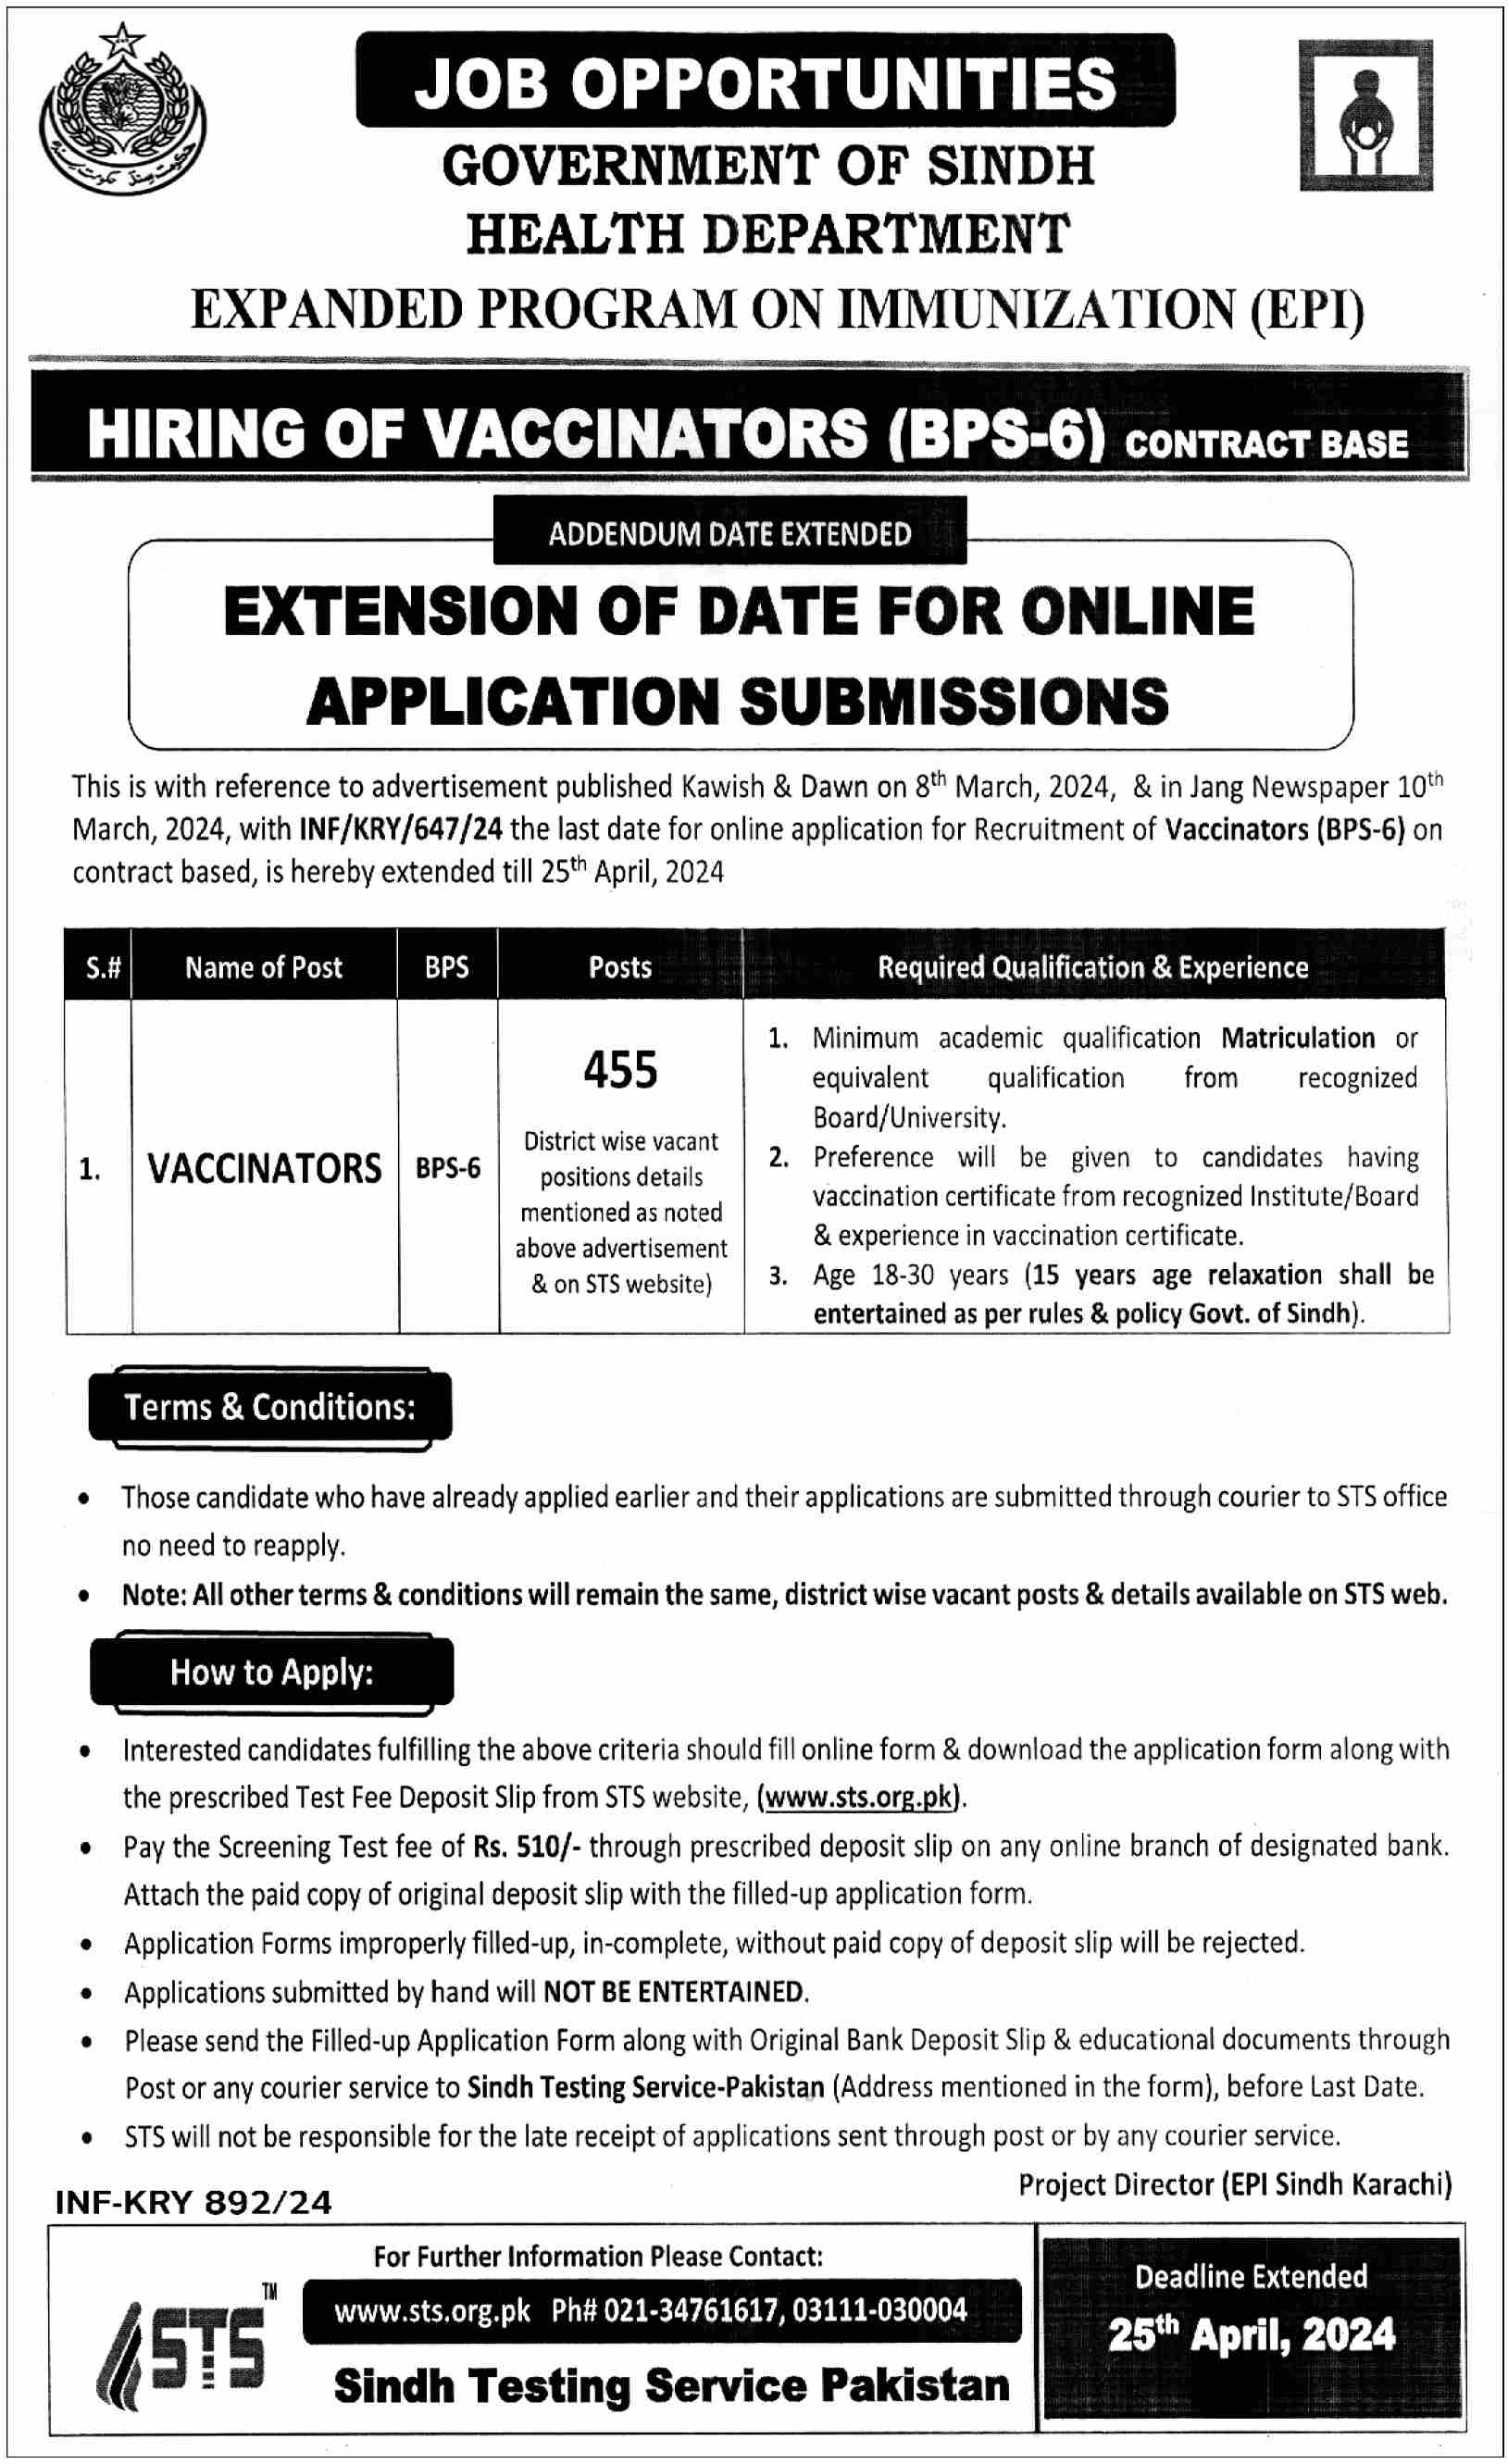 Vaccinator Jobs in Health Department Sindh March 2024 April STS Apply Online Expanded Program on Immunization (EPI) Latest